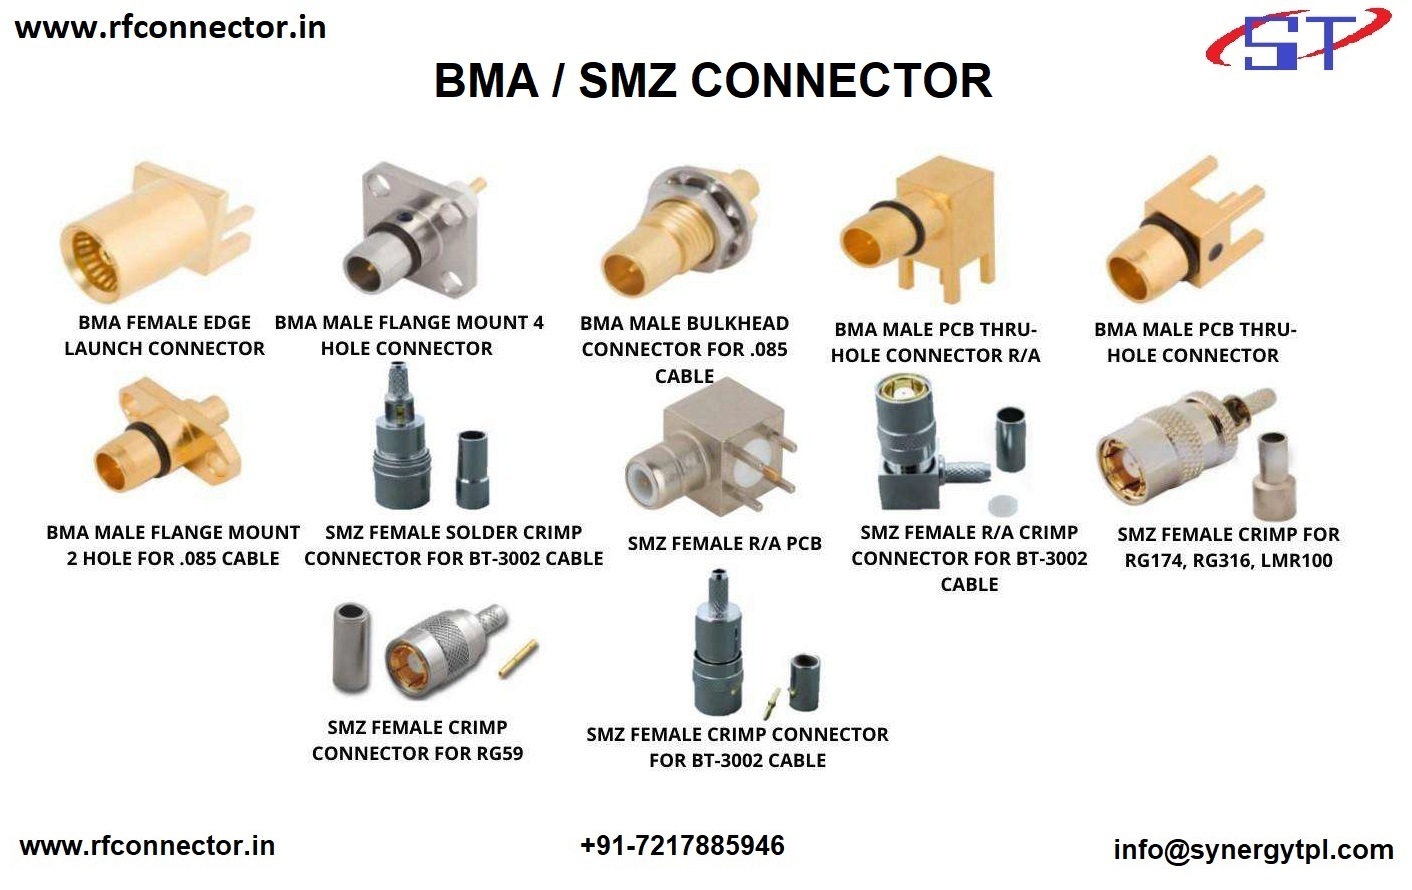 SMA male right angle crimp connector for LMR 100 cable